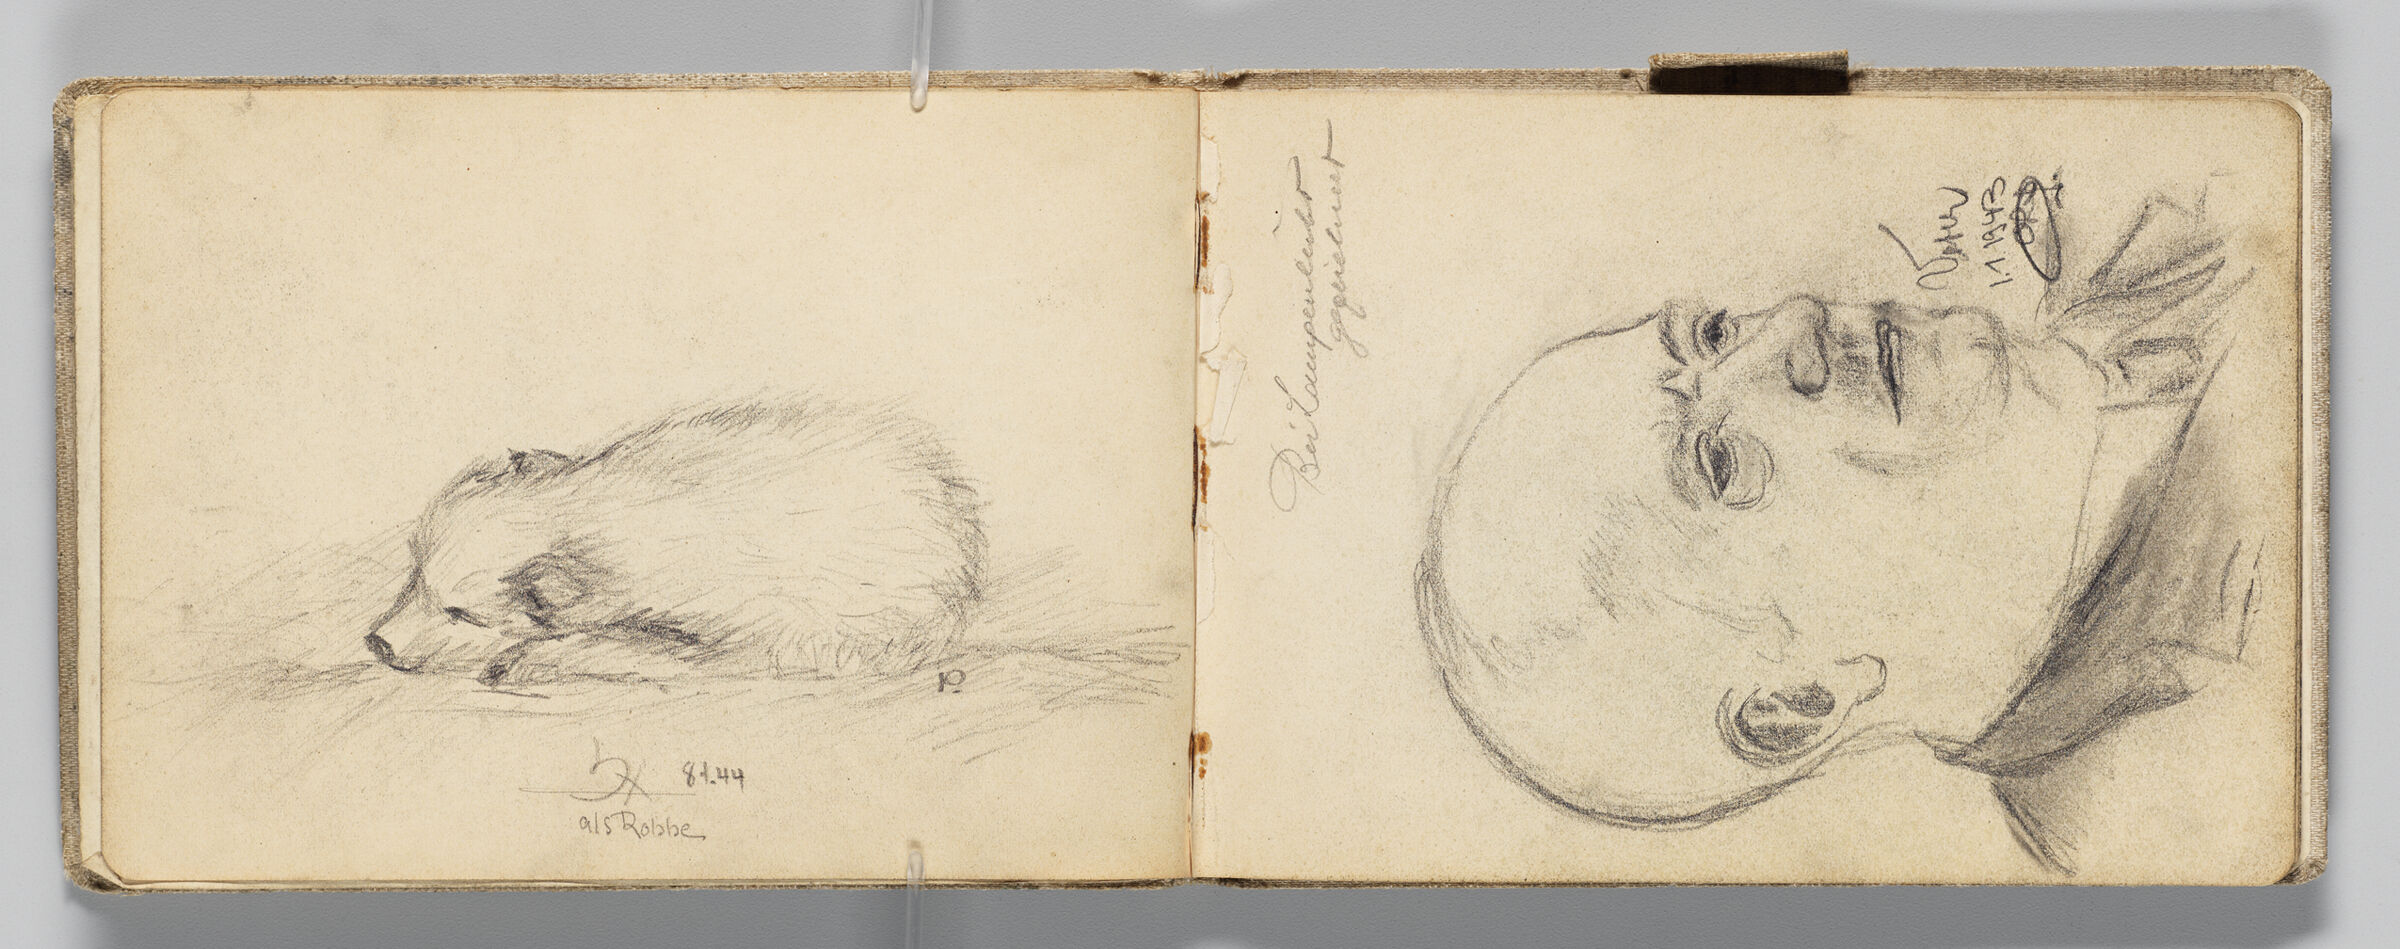 Untitled (Animal Sleeping, Left Page); Untitled (Portrait Of Artist's Father, Right Page)